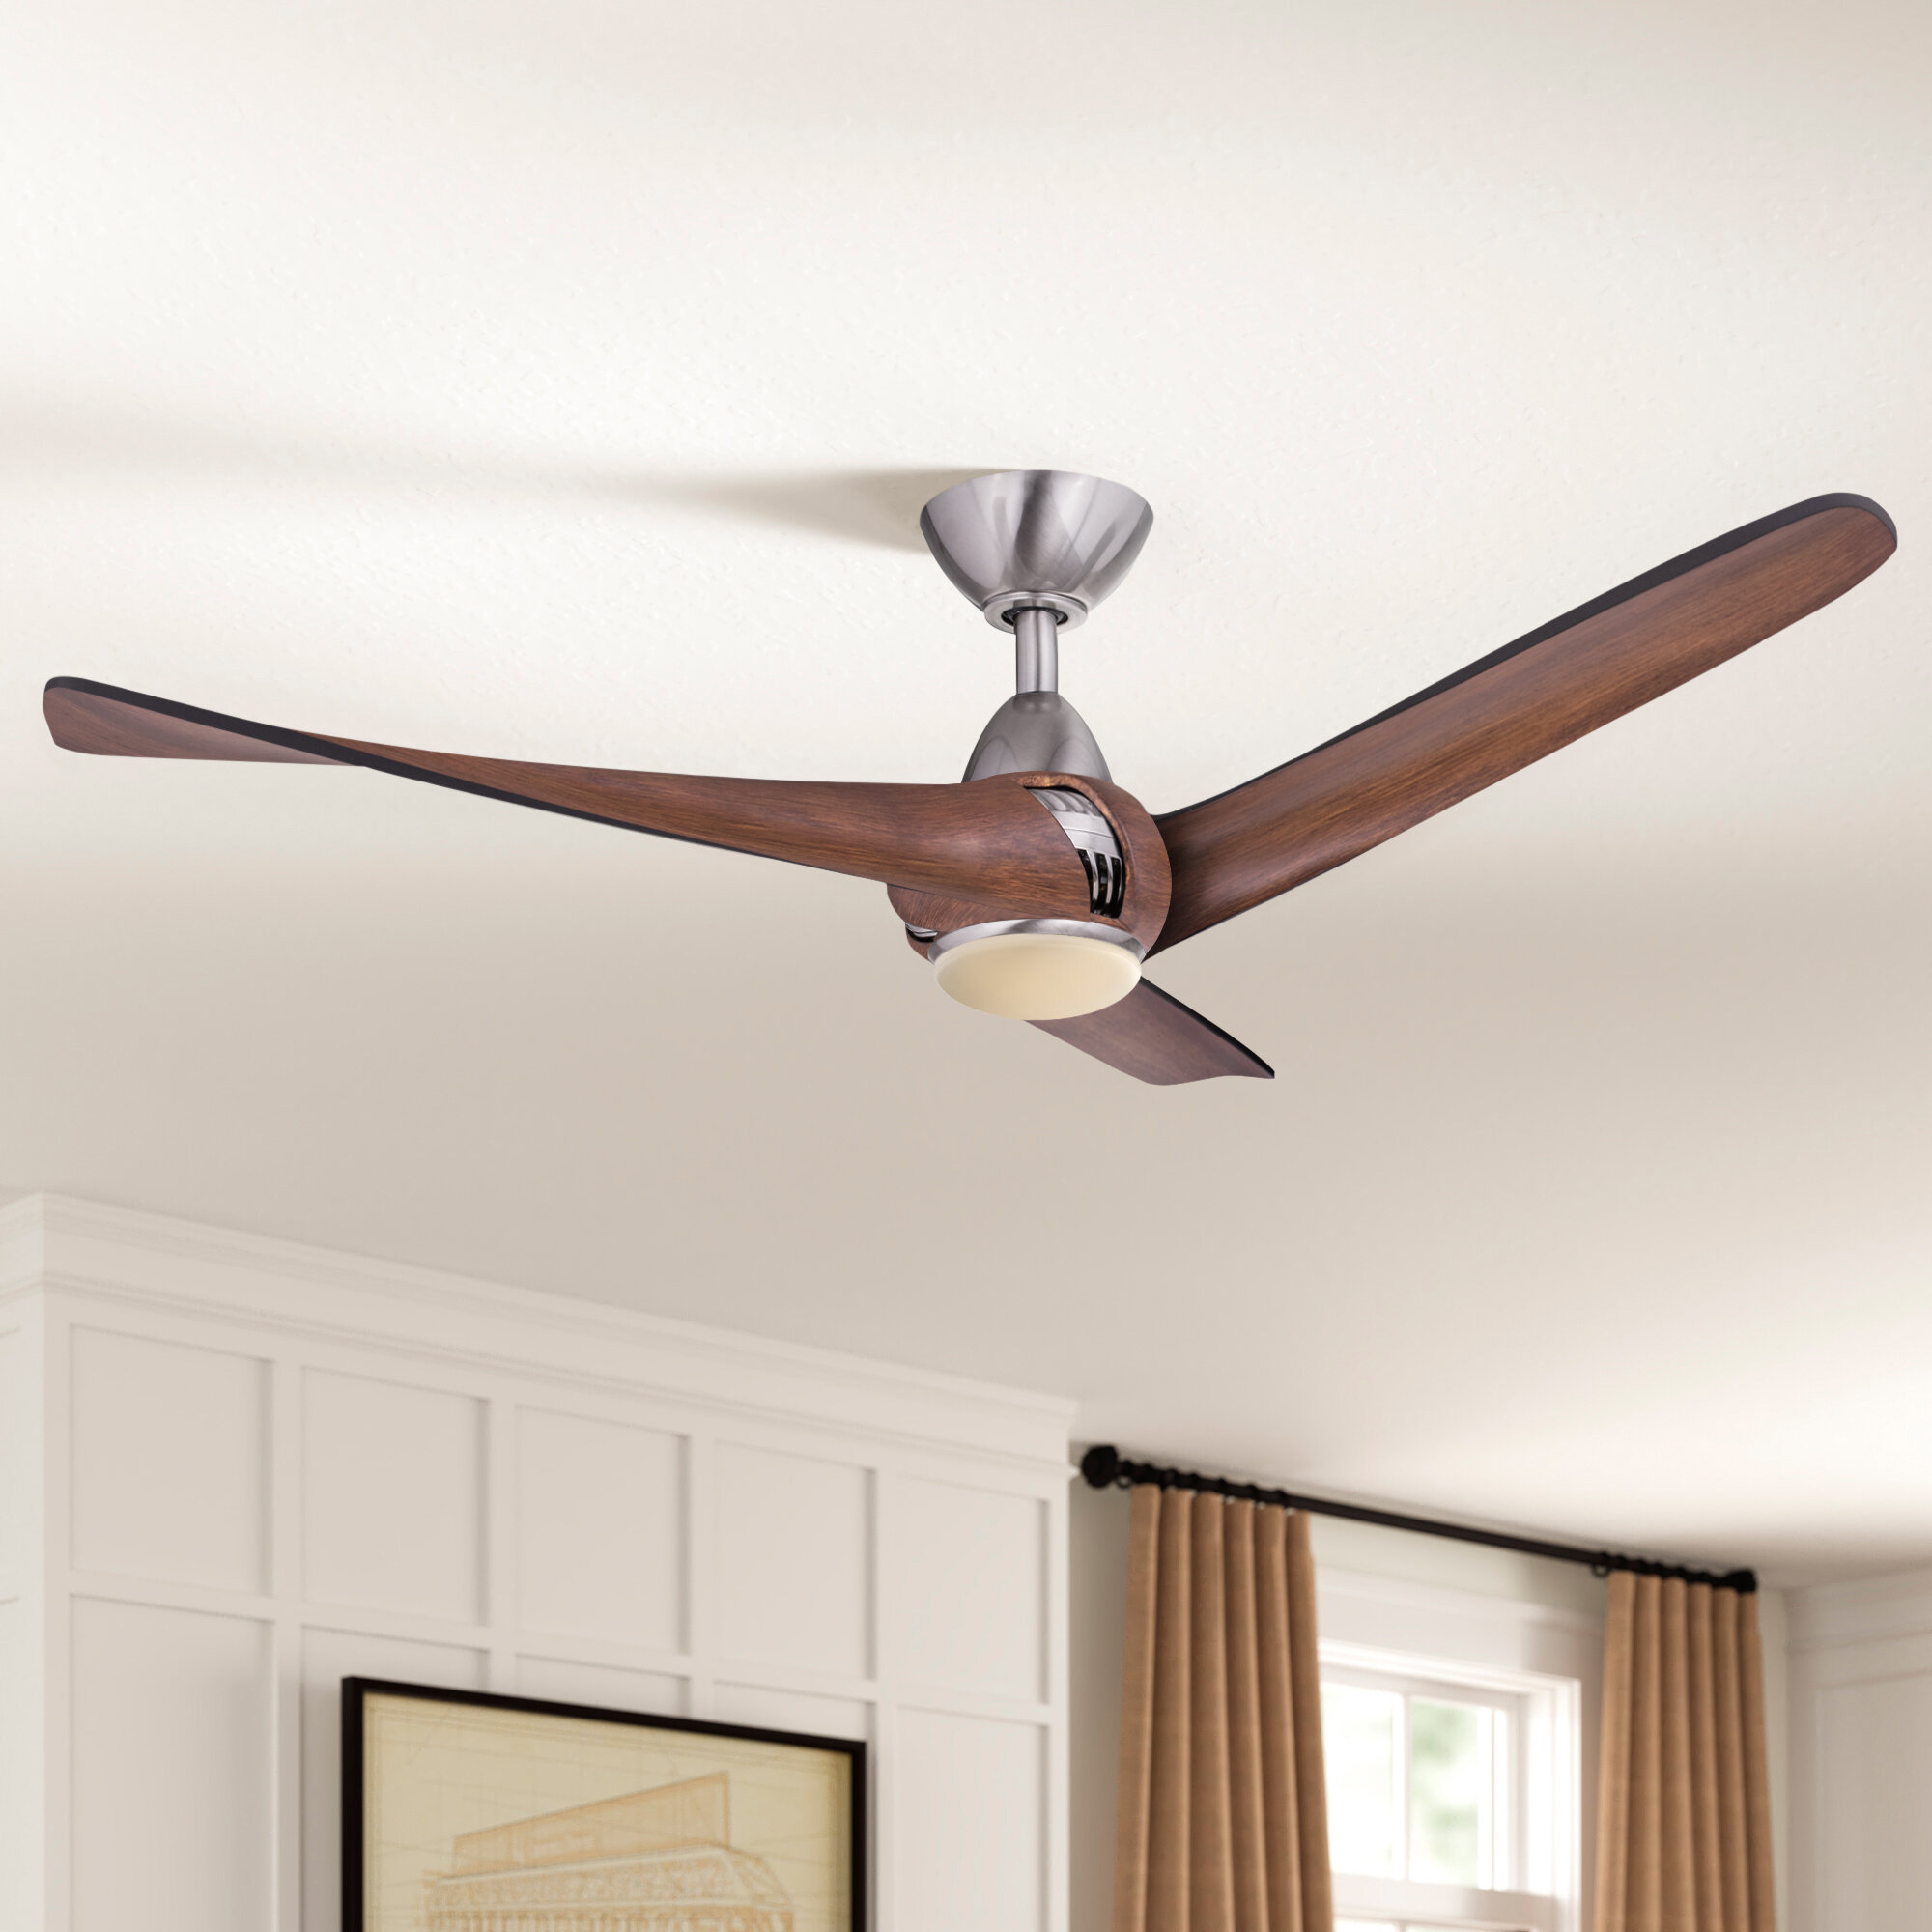 Albums 97+ Images Pictures Of Ceiling Fans In Bedrooms Full HD, 2k, 4k